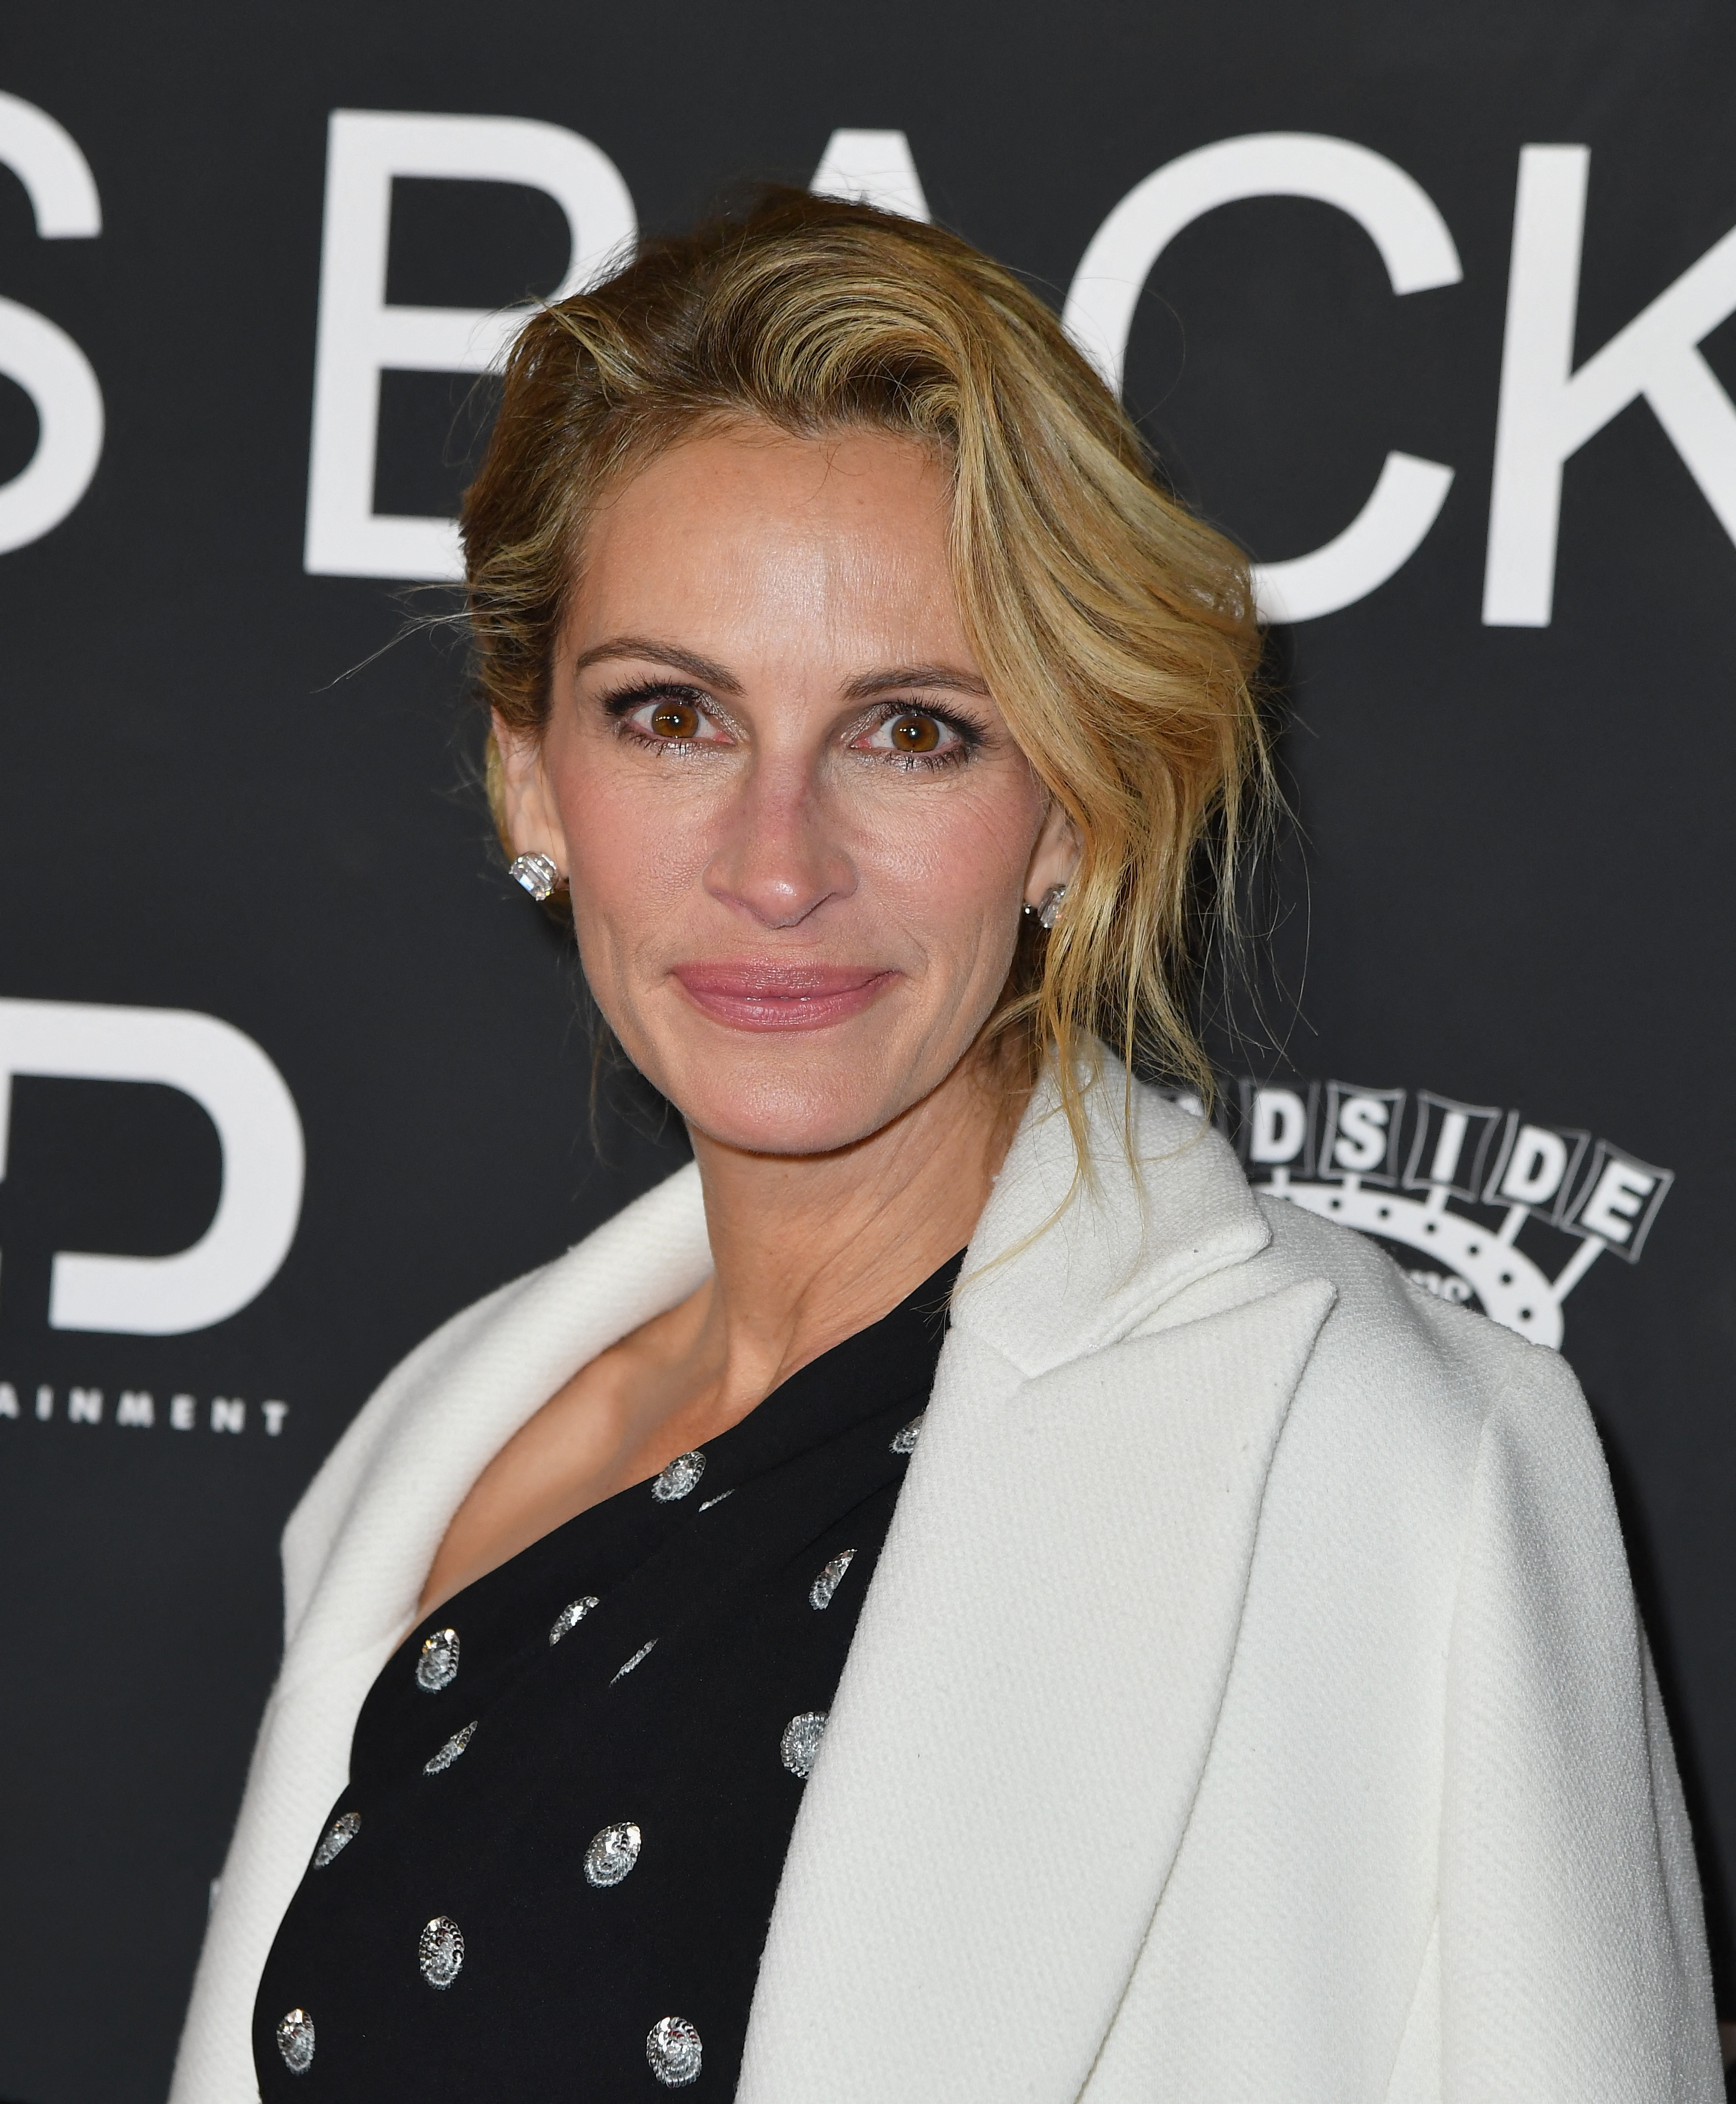 Woman with updo and white blazer over a black dress adorned with crystals, posing at an event